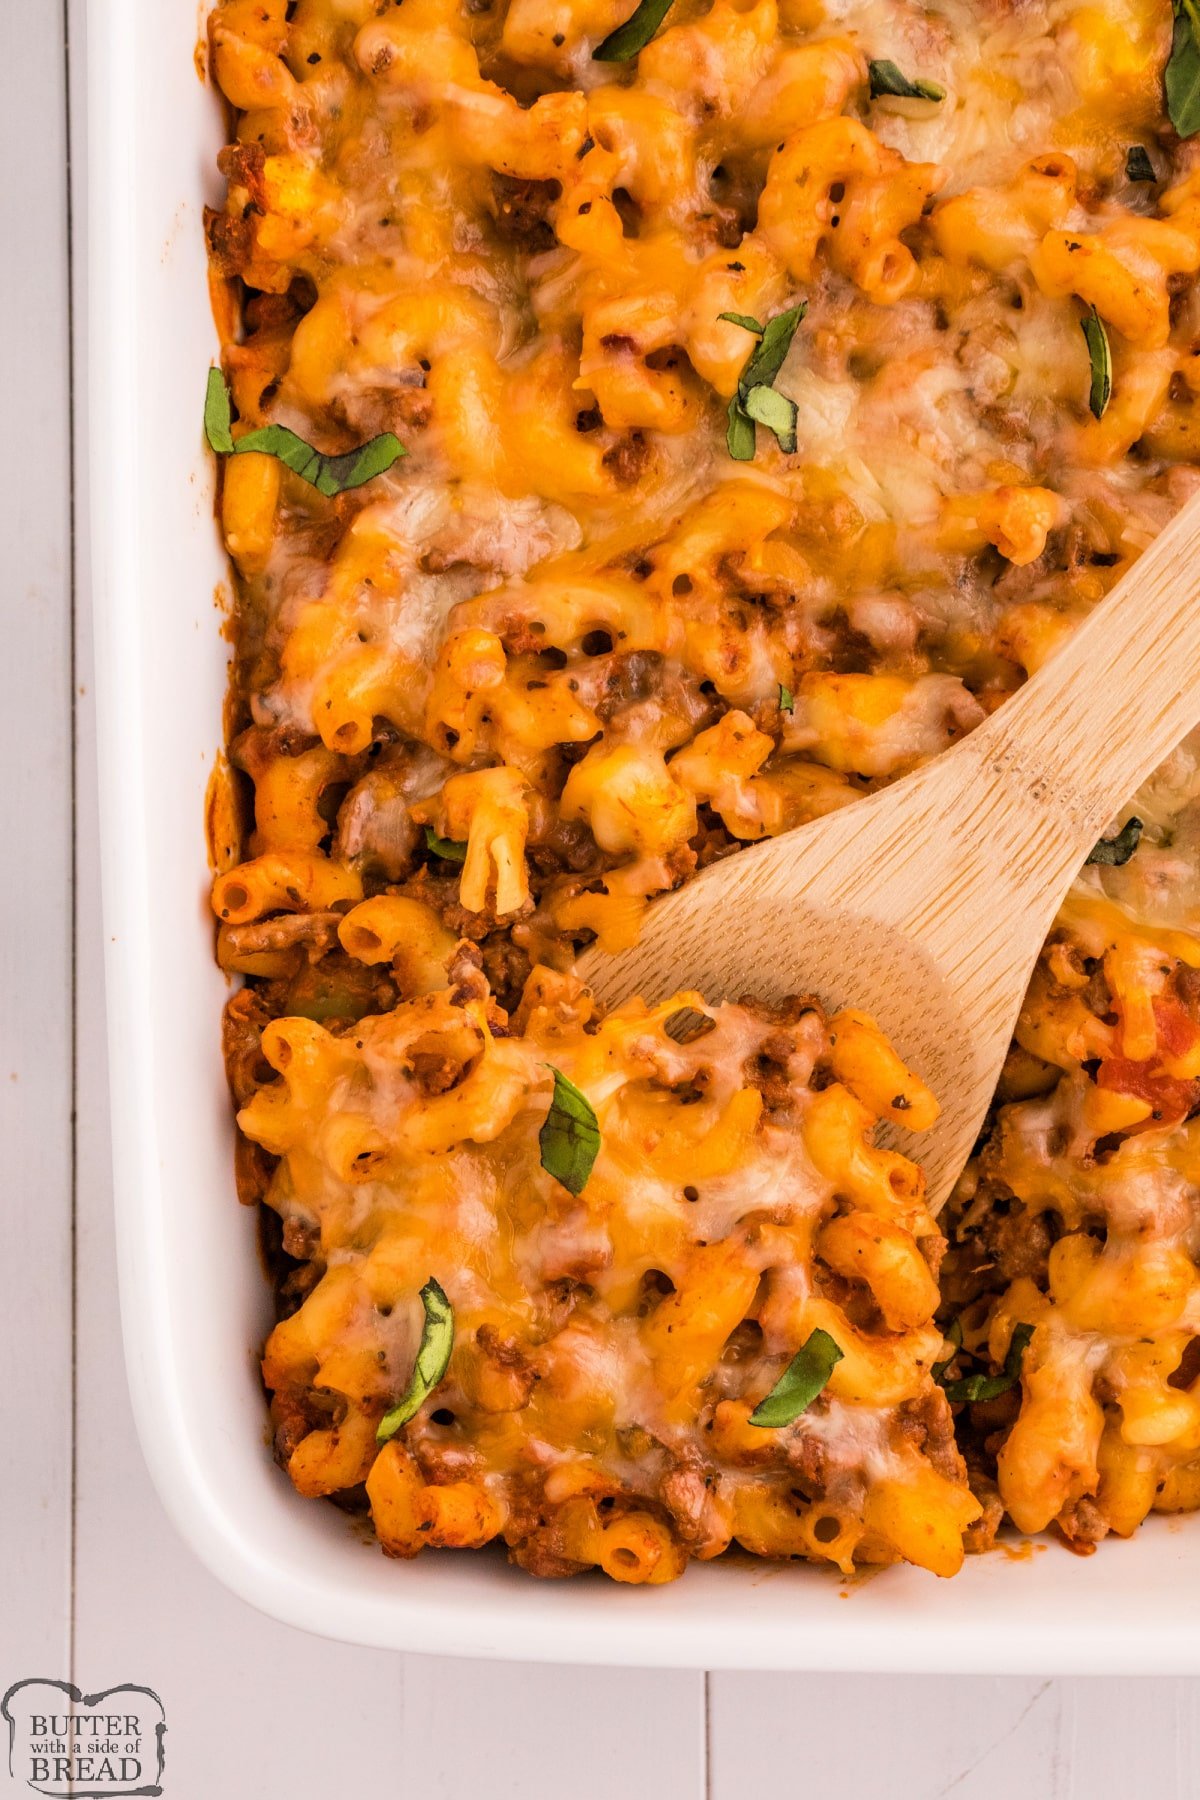 Cheesy Beef & Zucchini Casserole is a delicious one-dish meal that the whole family will love. Made with fresh zucchini, ground beef, macaroni noodles, marinara sauce, cheese and lots of spices! 